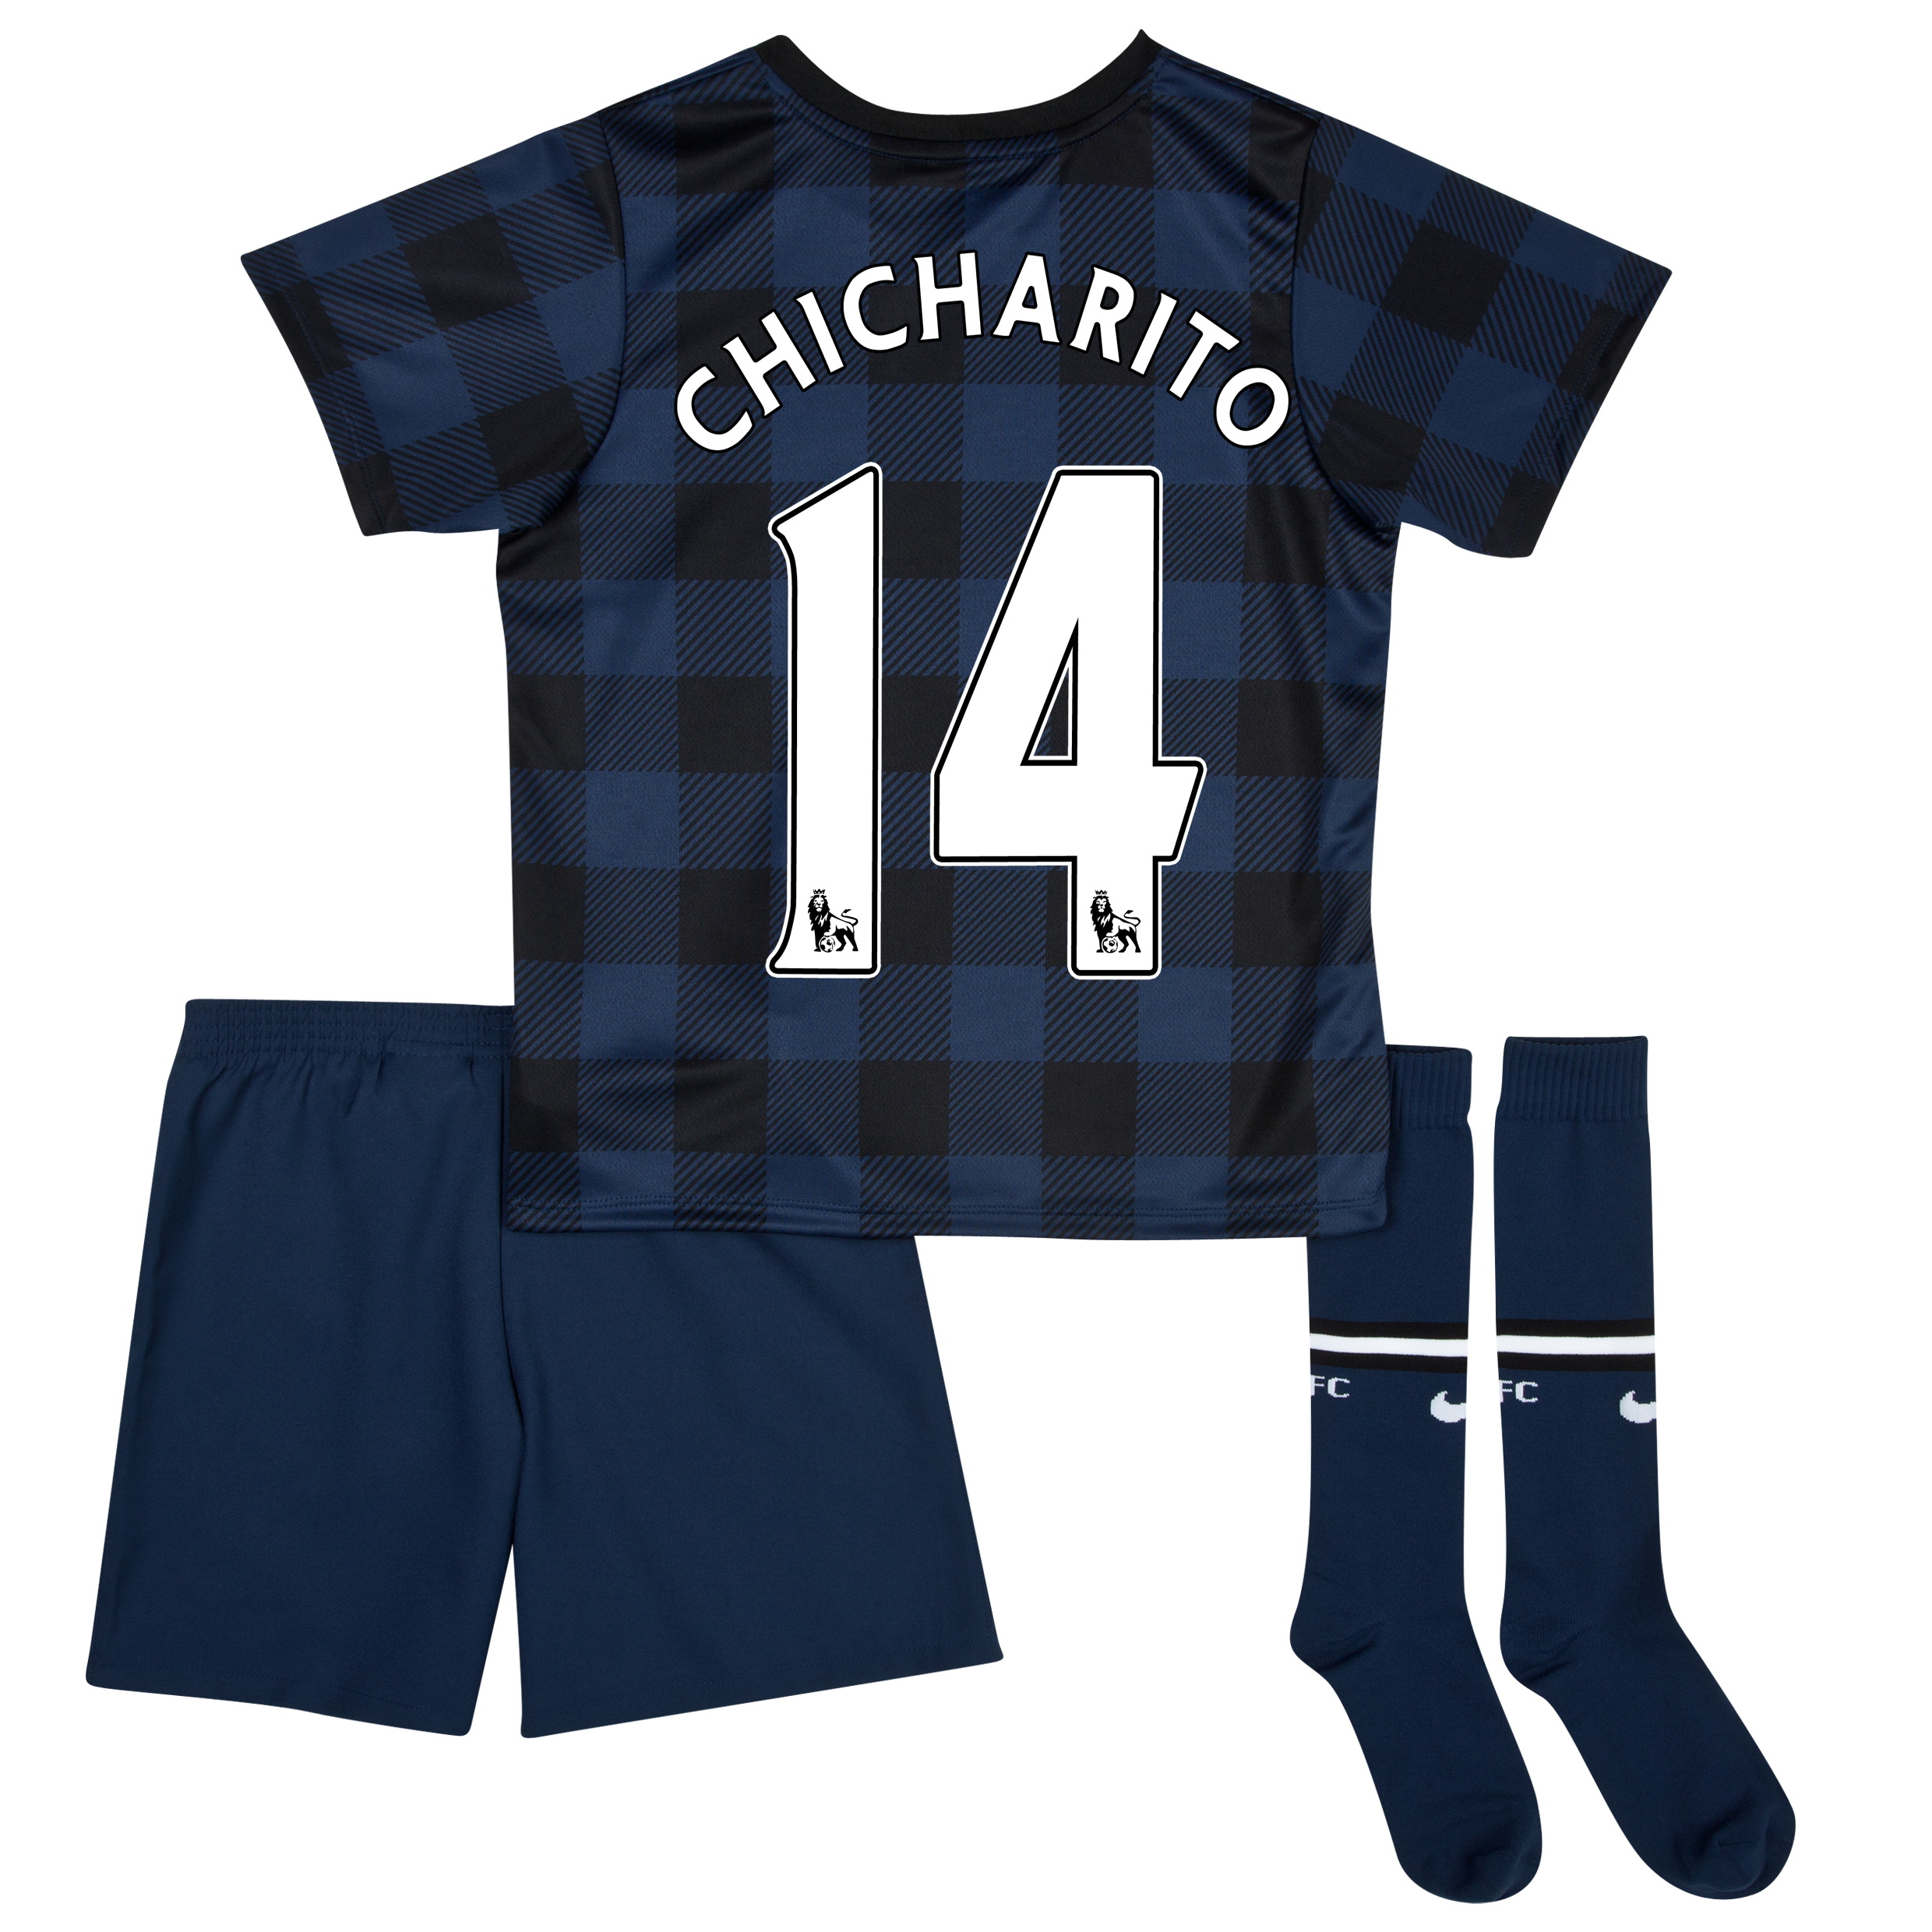 Manchester United Away Kit 2013/14 - Little Boys with Chicharito 14 printing